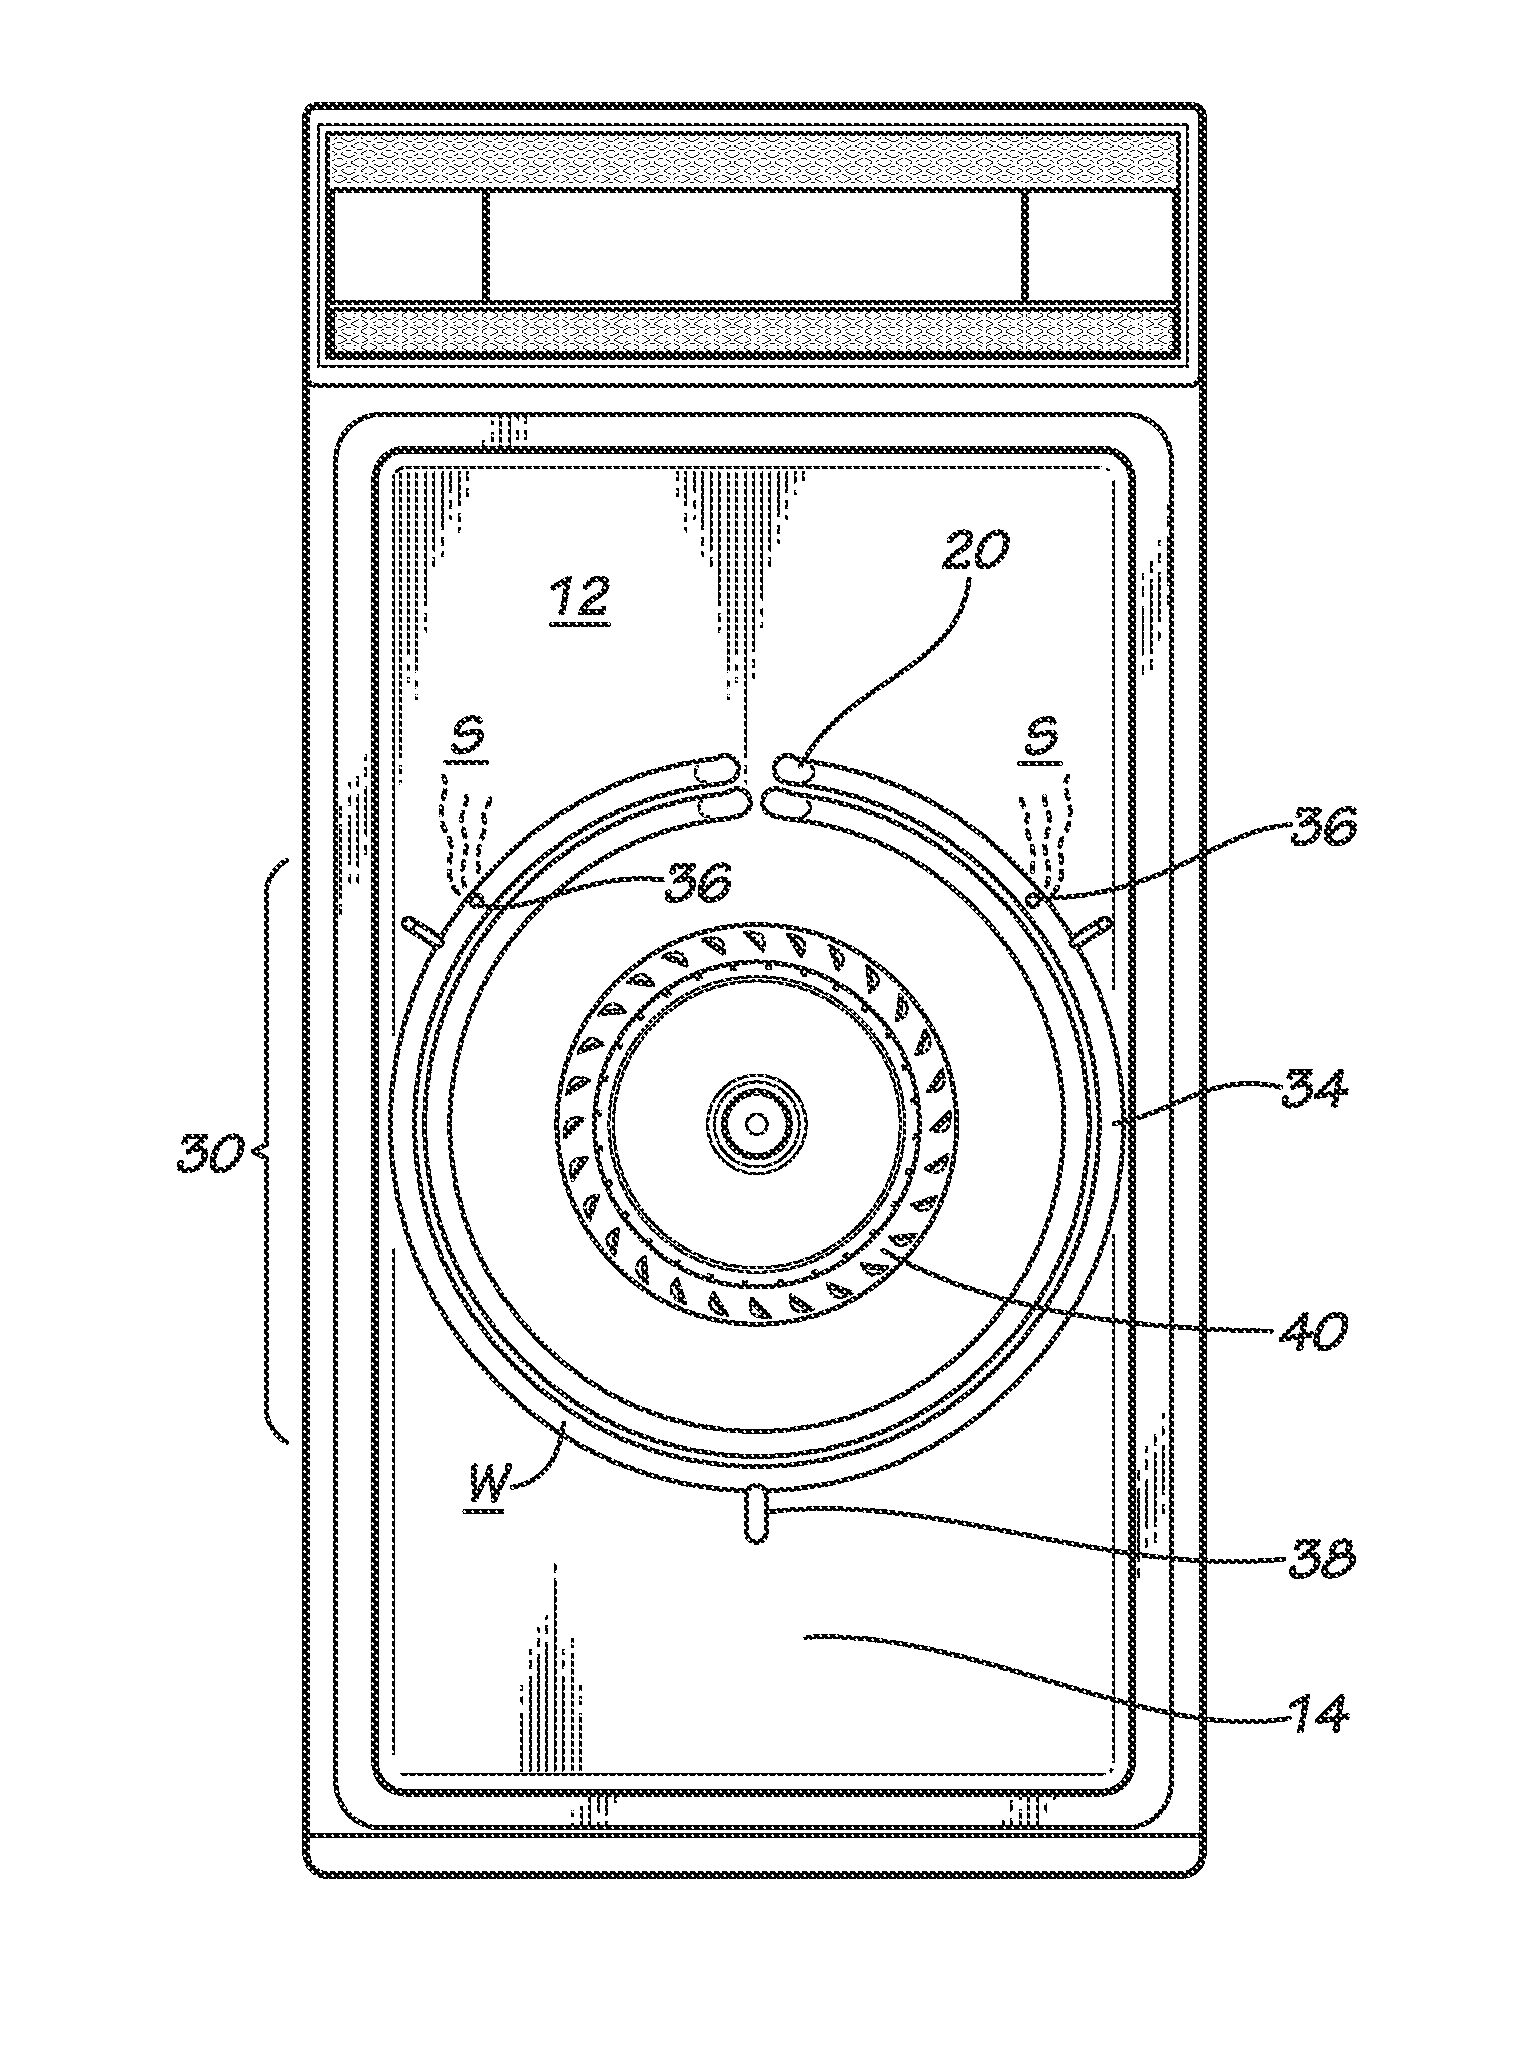 Oven Steam Generator Systems and Methods